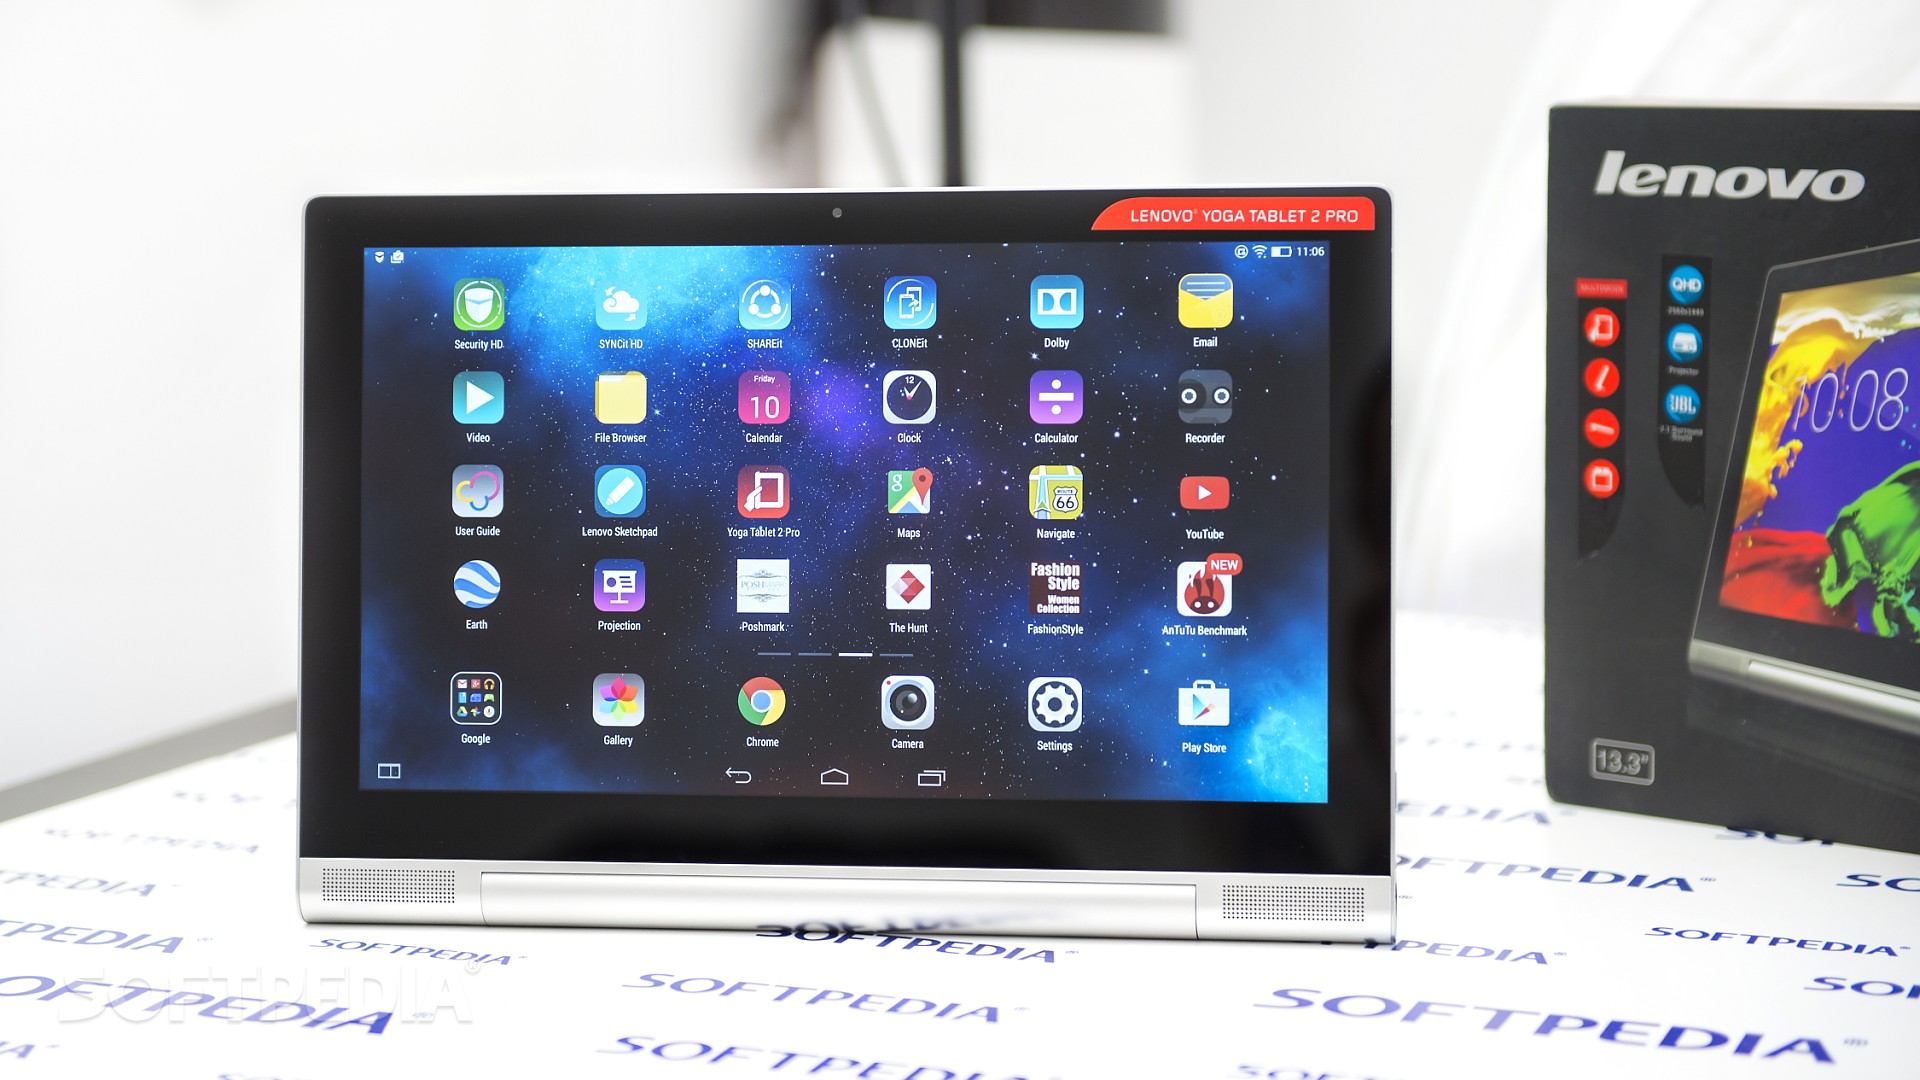 Lenovo Yoga Tablet 2 Pro Review - A Big Tablet with Gorgeous